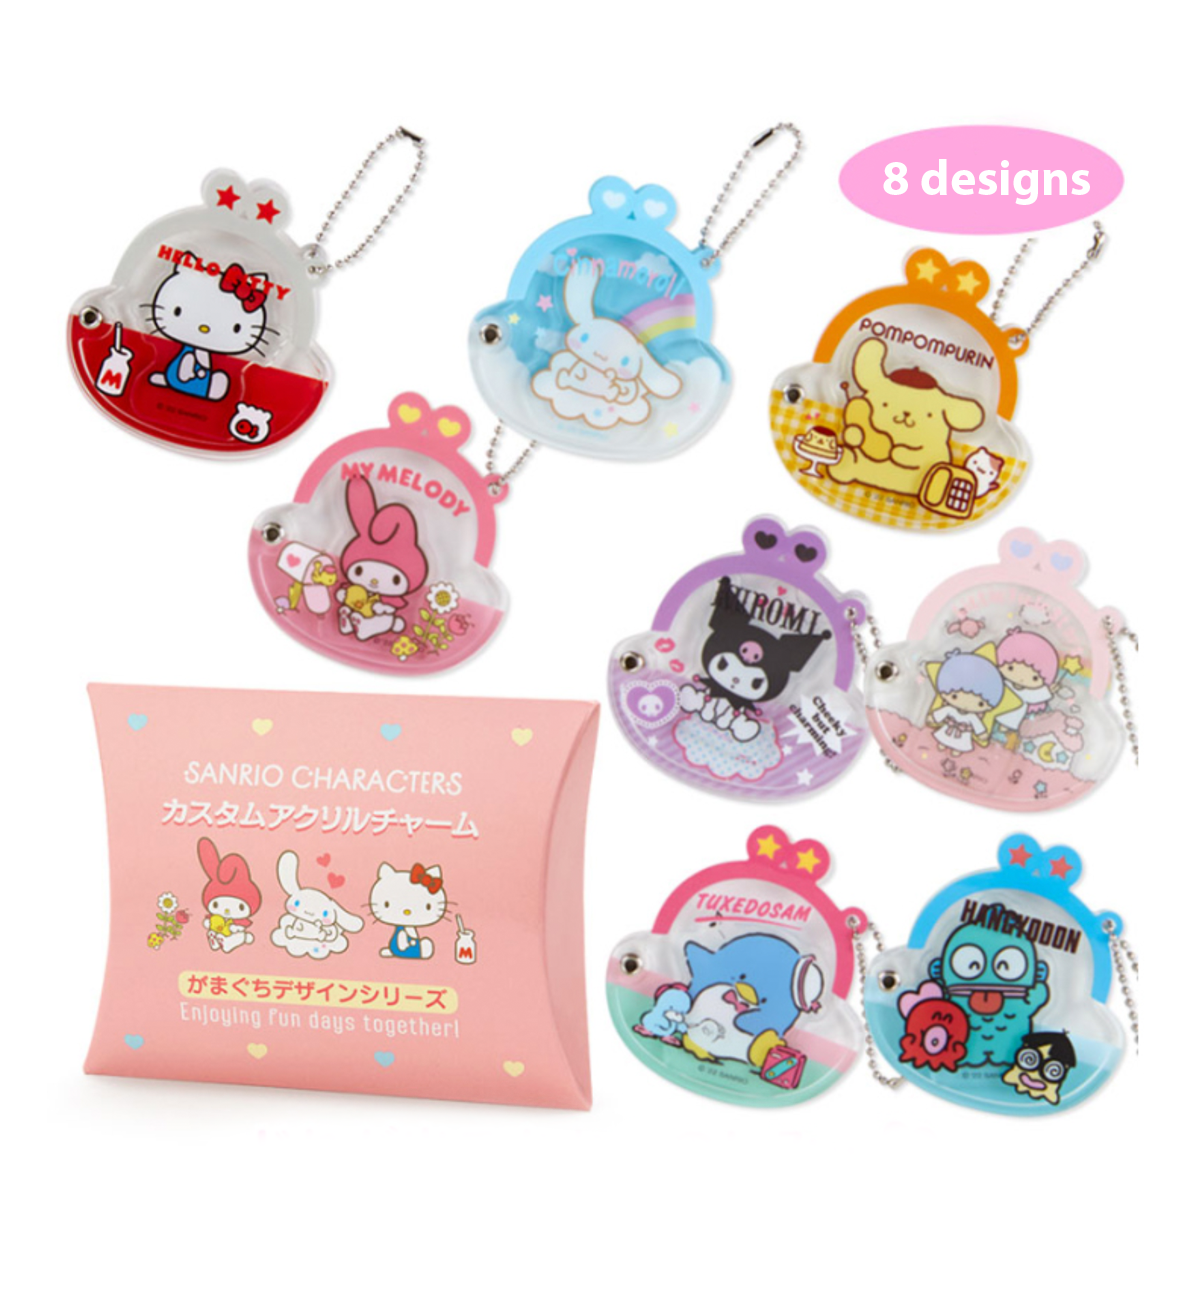 Sanrio icecream charms · Pinkstarcharms · Online Store Powered by Storenvy